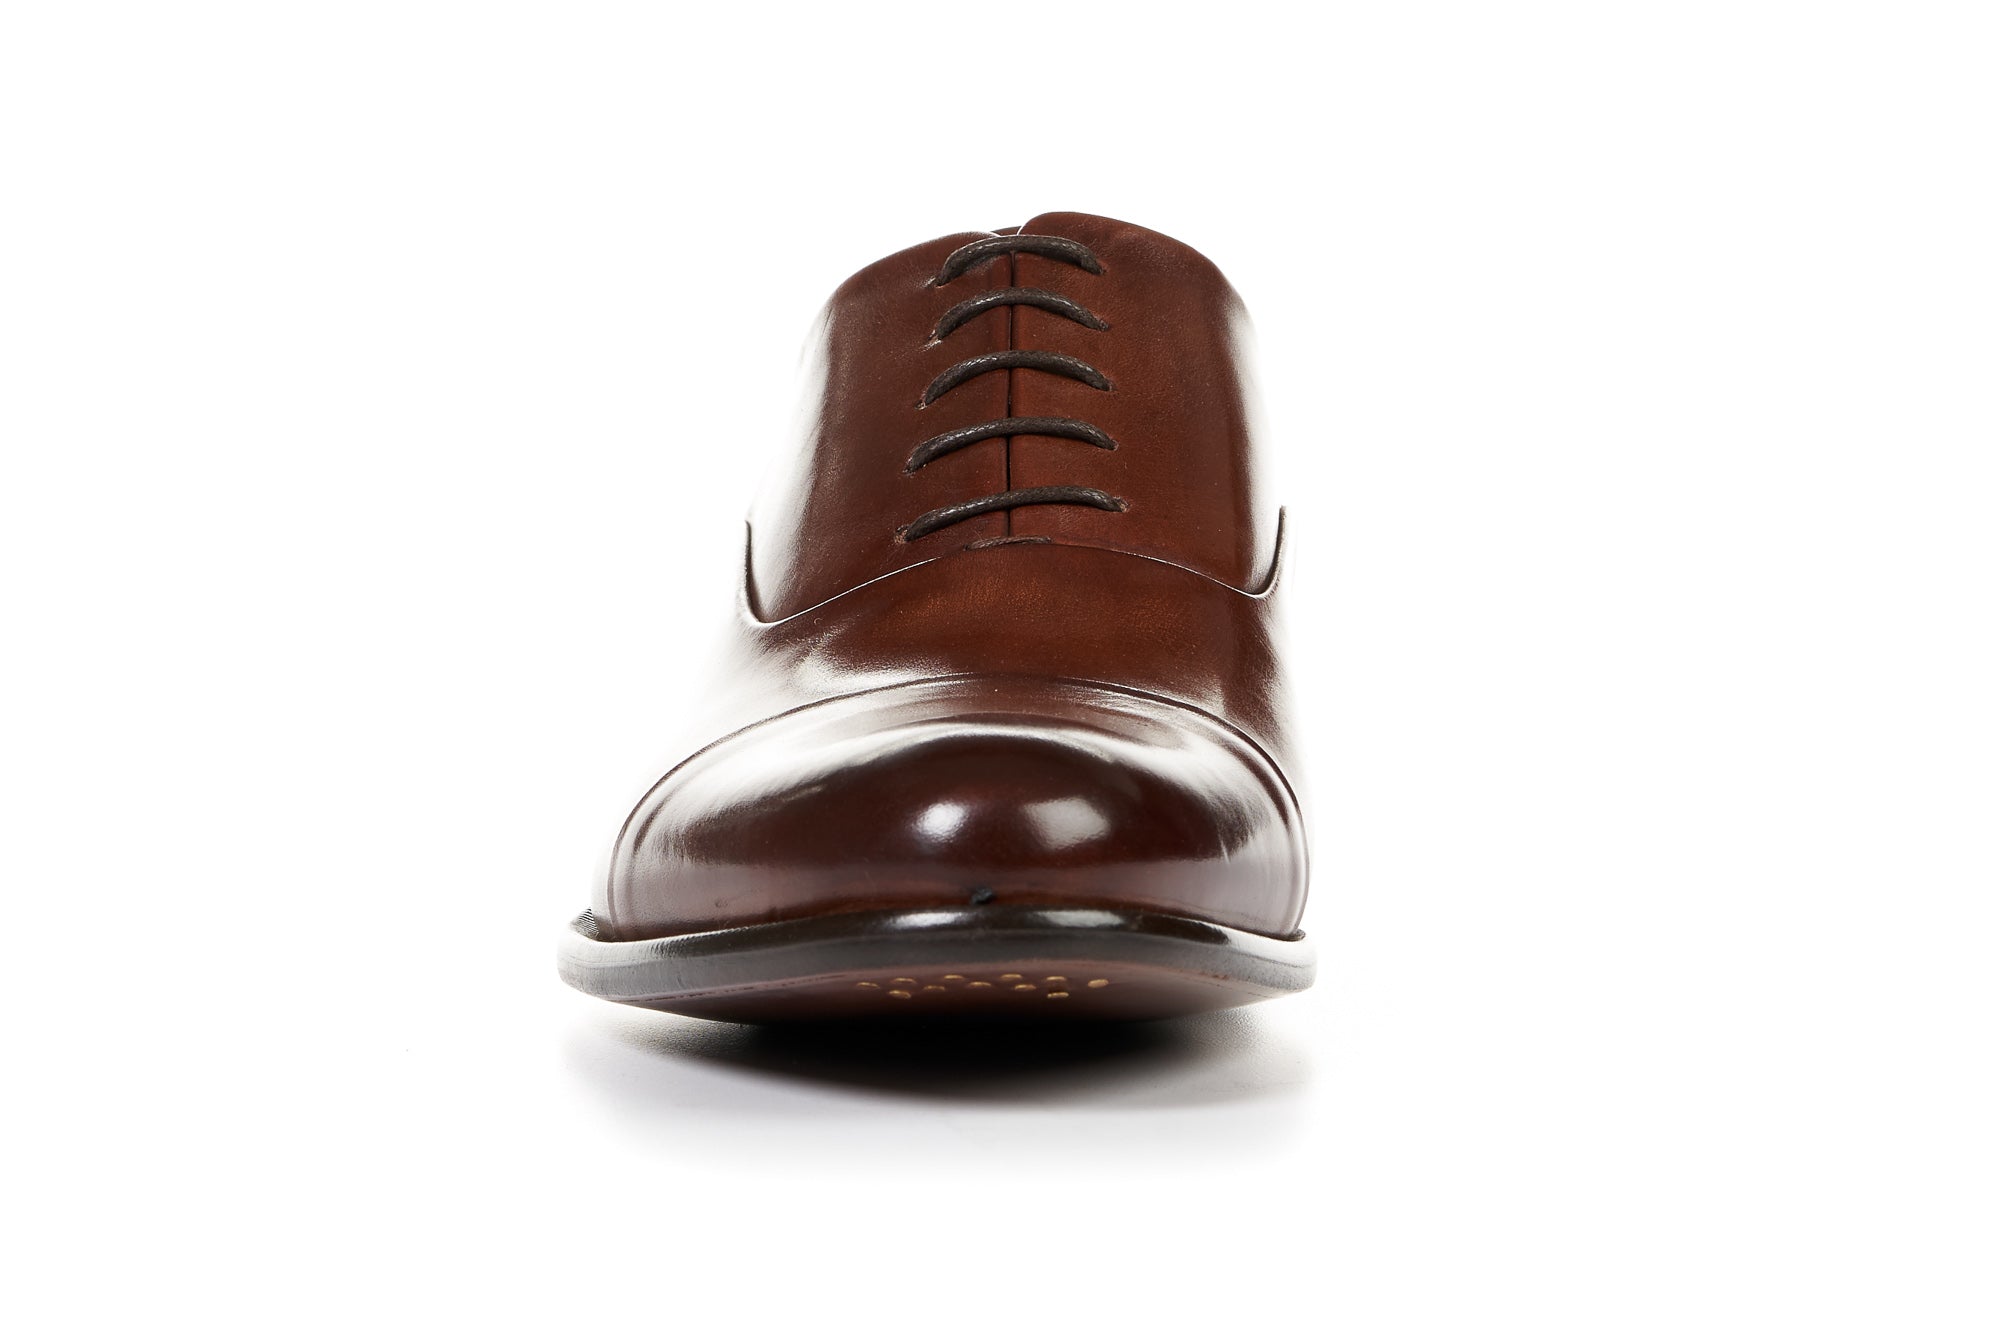 The Cagney Cap-Toe Oxford - Brown